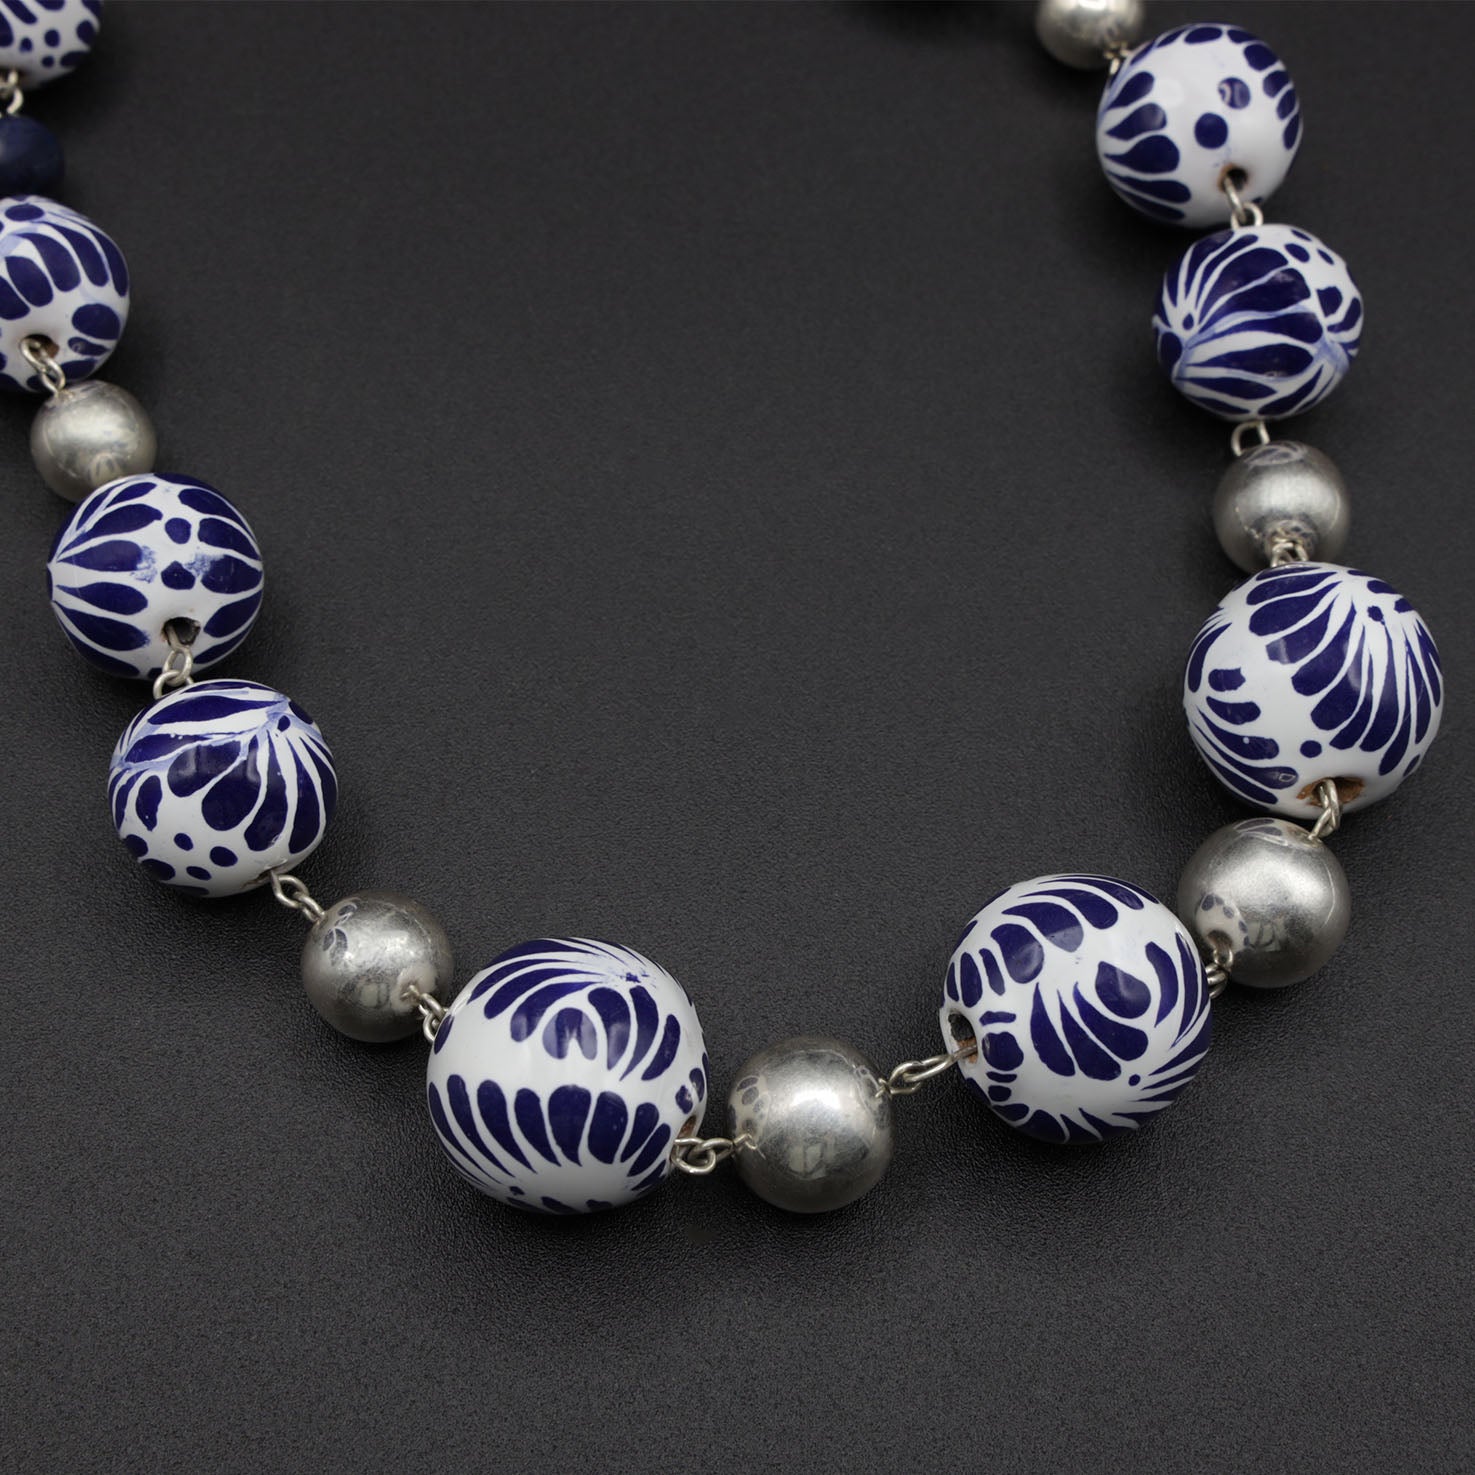 Sterling Silver Talavera Beads Statement Necklace